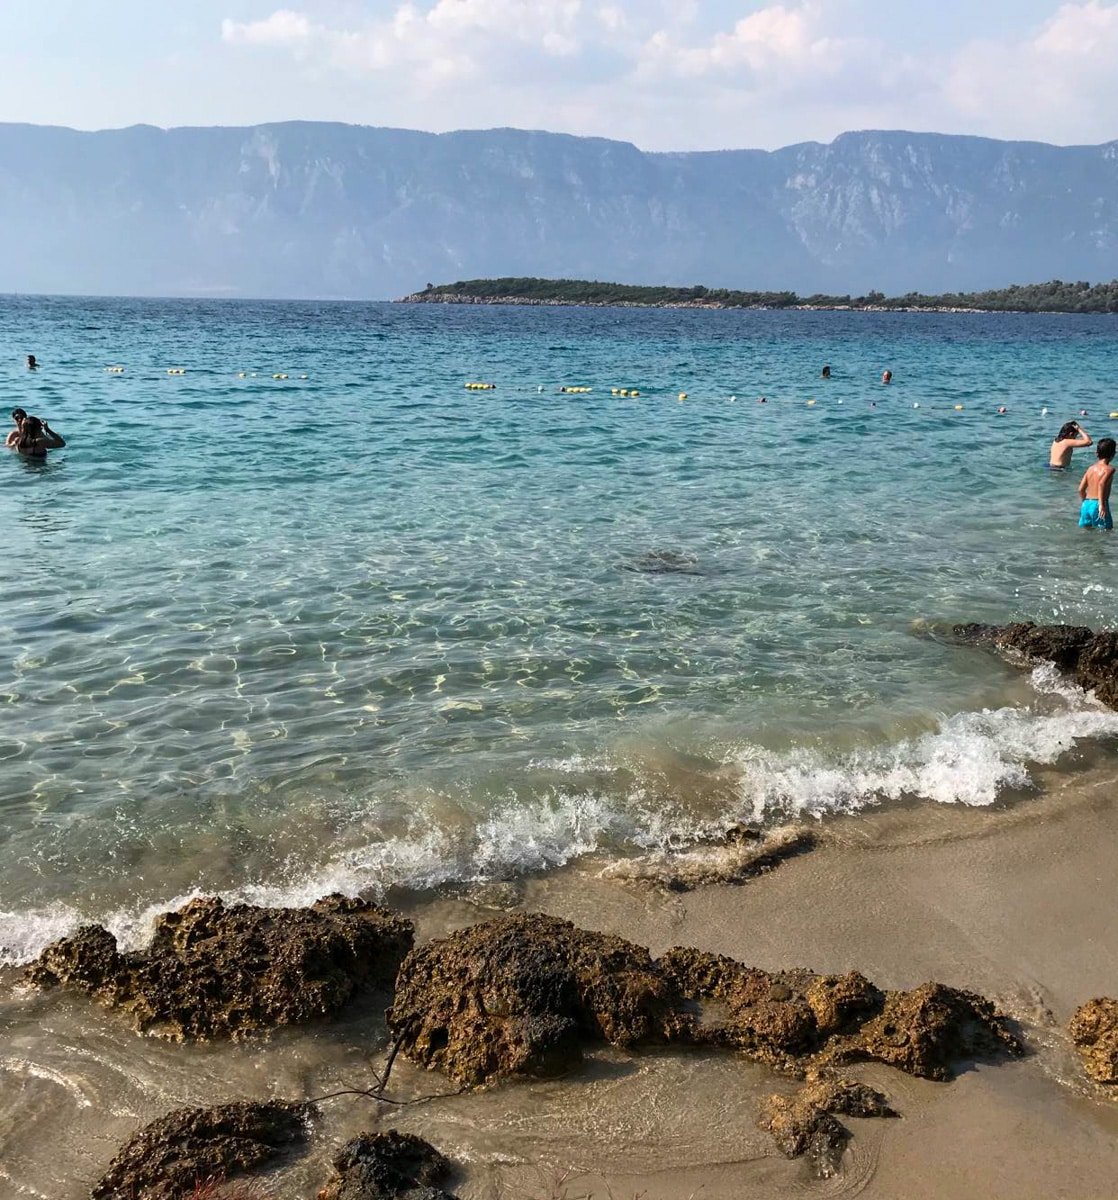 A group of people in the water at Incekum, near Marmaris